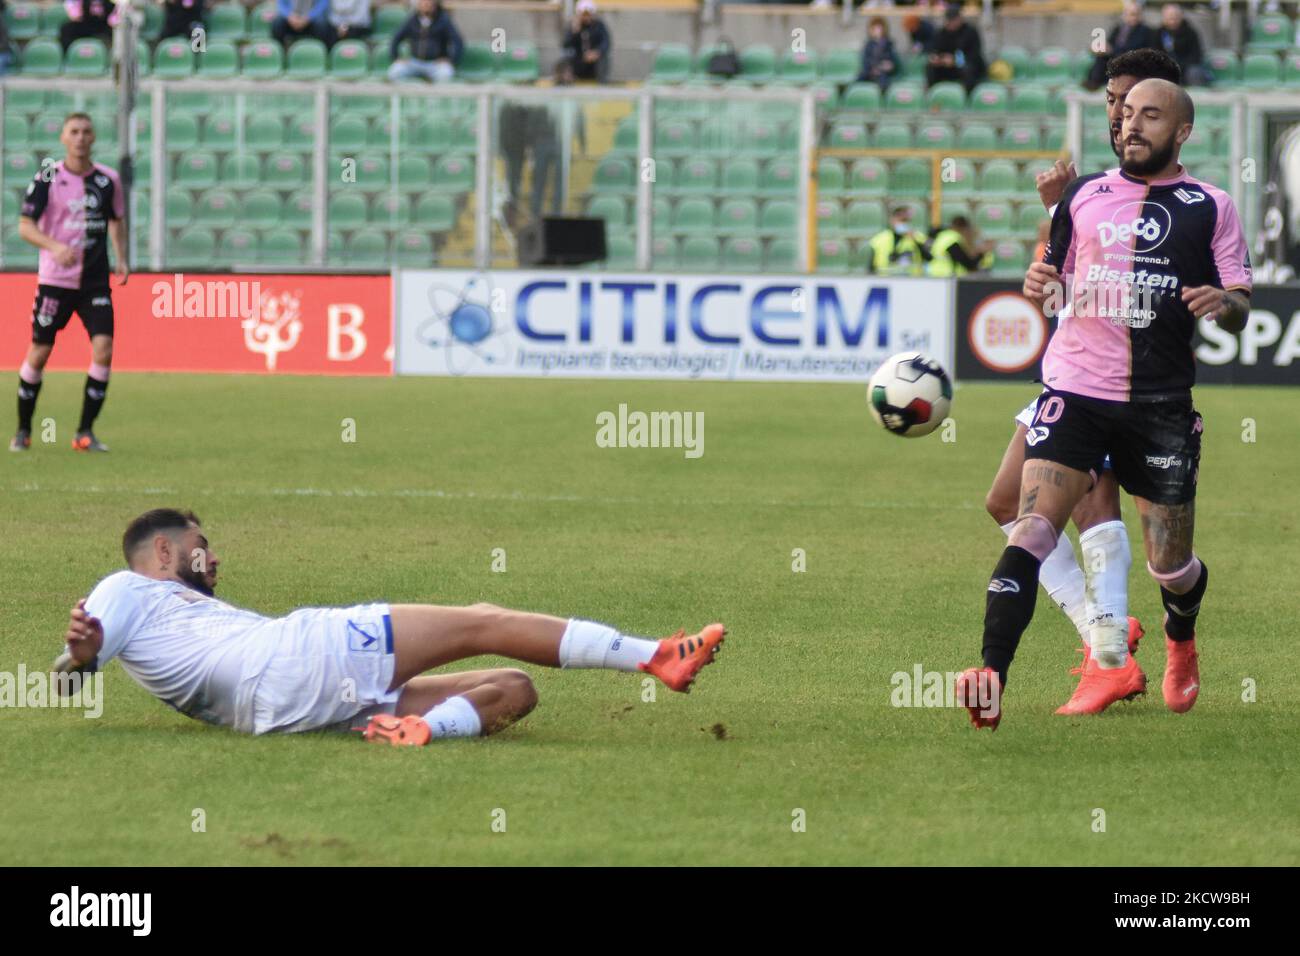 Palermo, Italy. 17th Mar, 2023. Nicola Valente (Palermo) and Fabio Ponsi  (Modena) during Palermo FC vs Modena FC, Italian soccer Serie B match in  Palermo, Italy, March 17 2023 Credit: Independent Photo